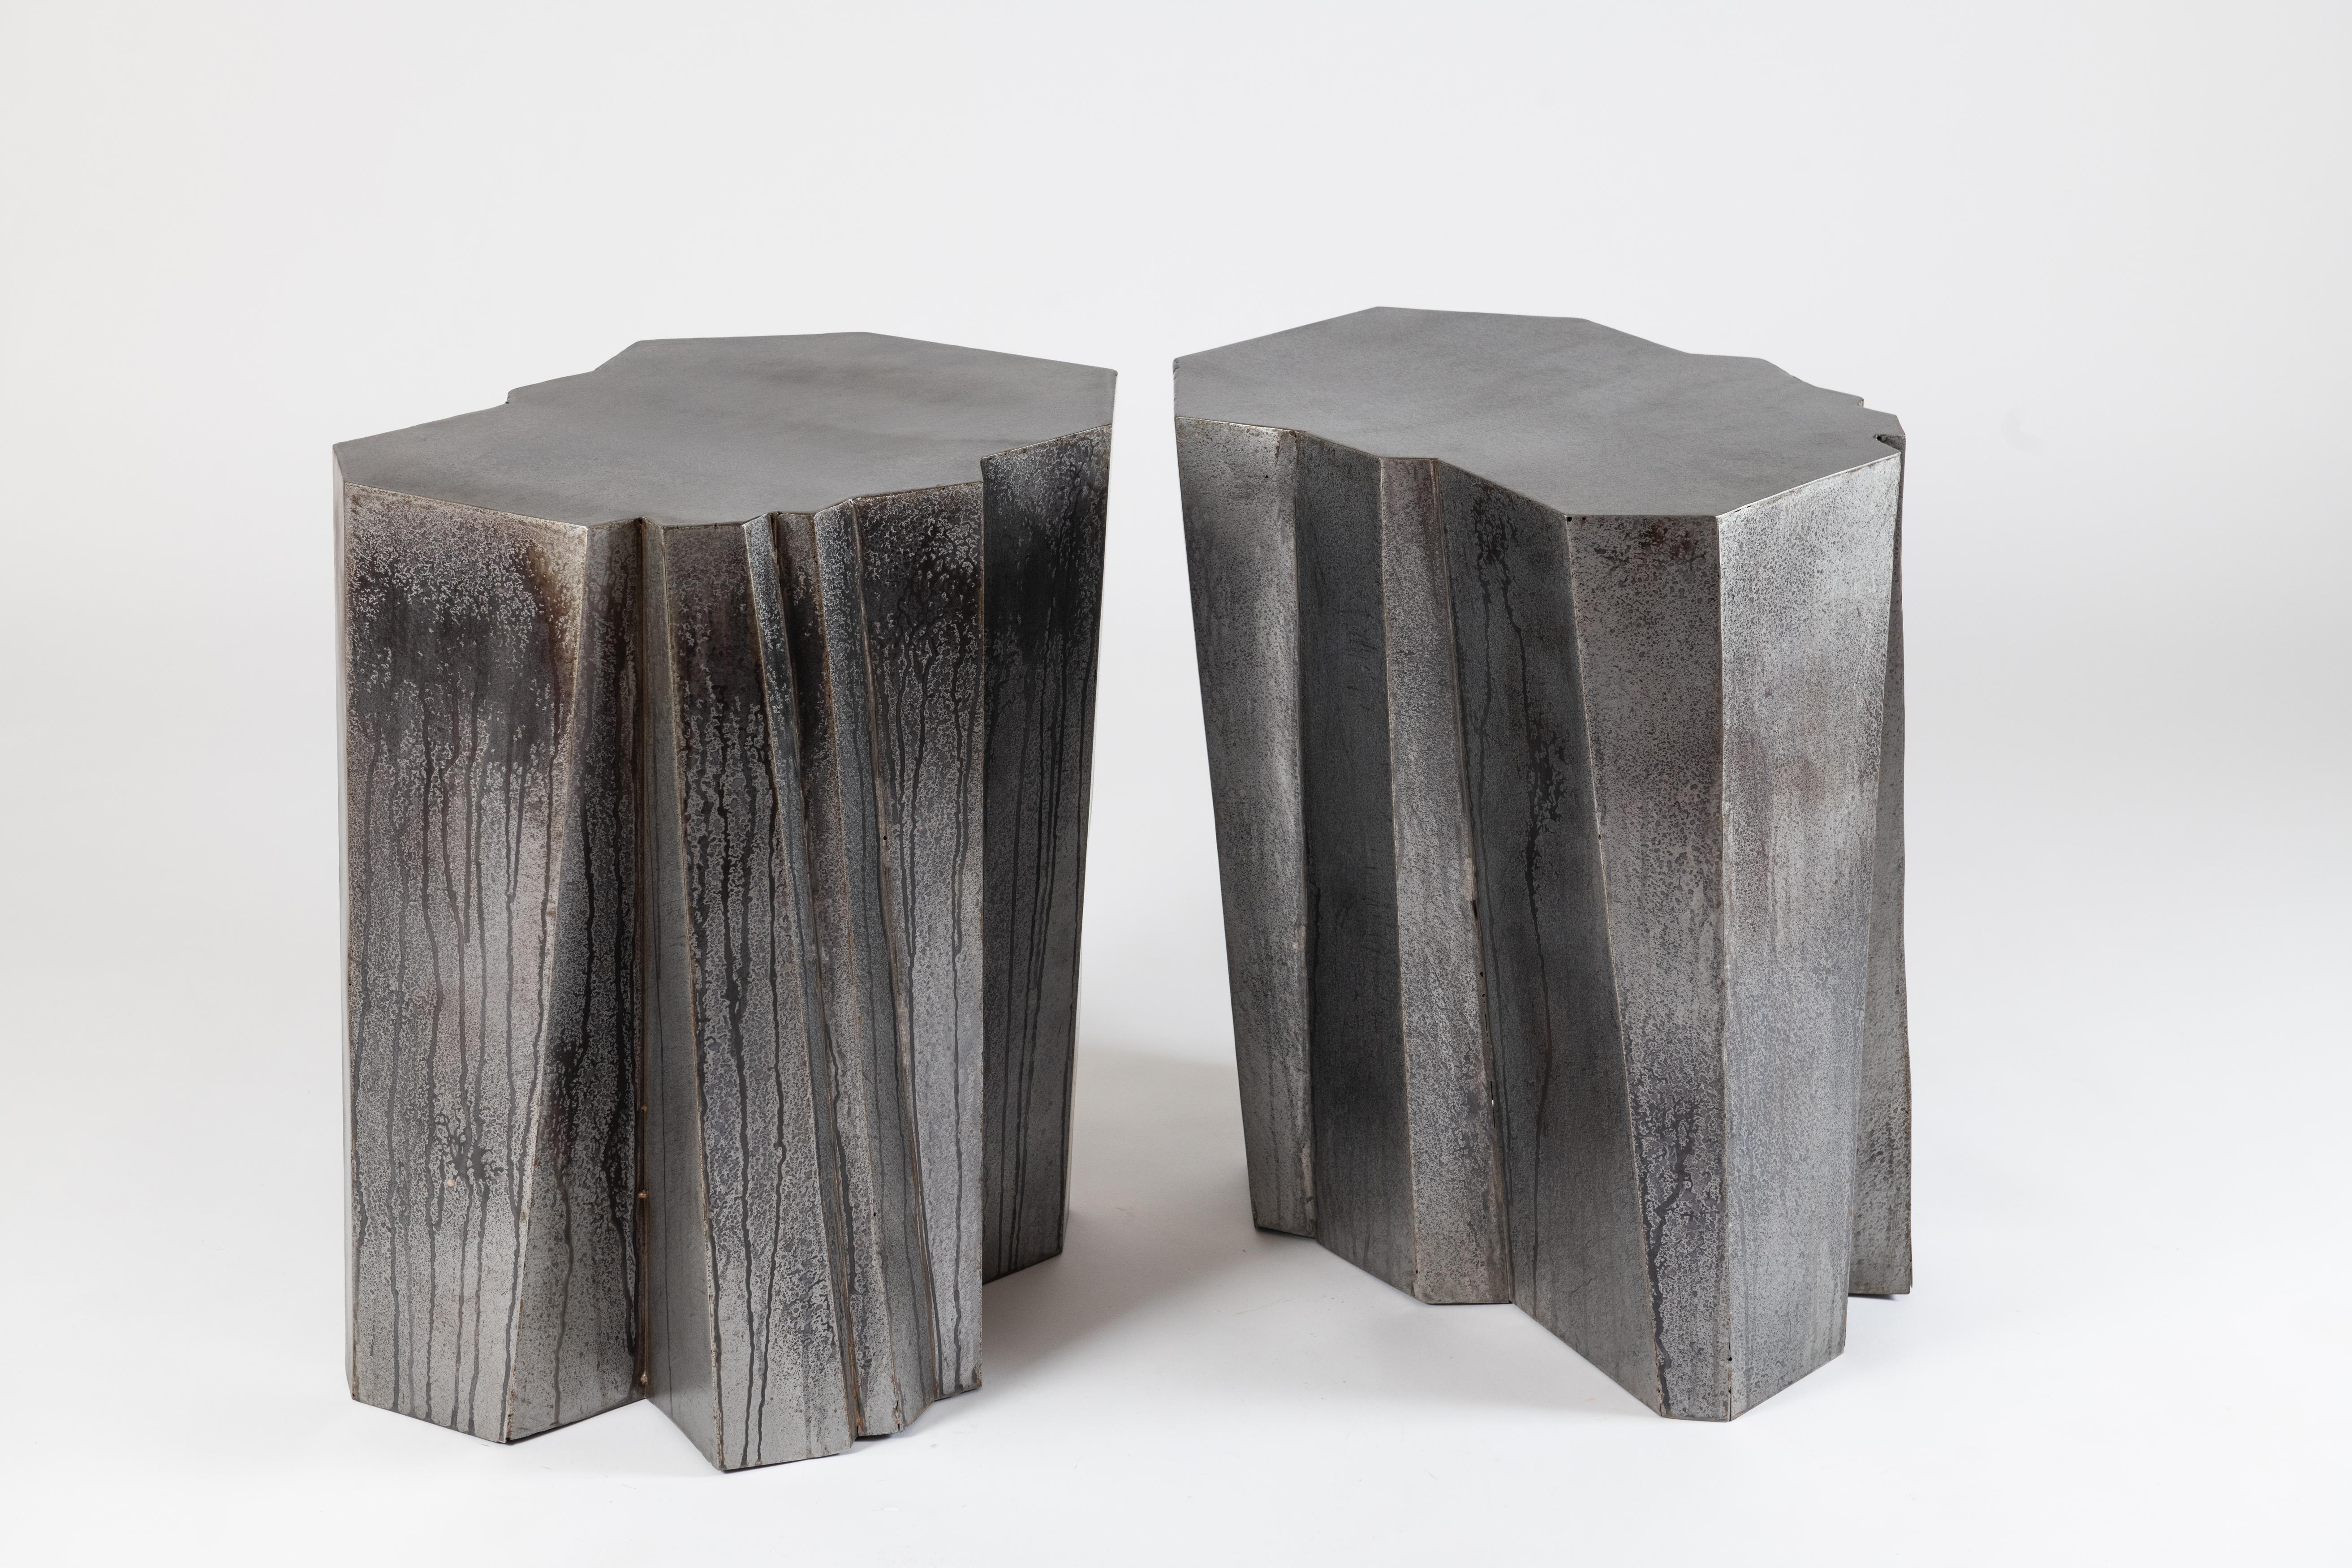 Gregory Nangle
Pair of cleaving side tables / stools, 2021
Stainless steel with gunmetal patina
Measures: 15 x 22 x 24 in.